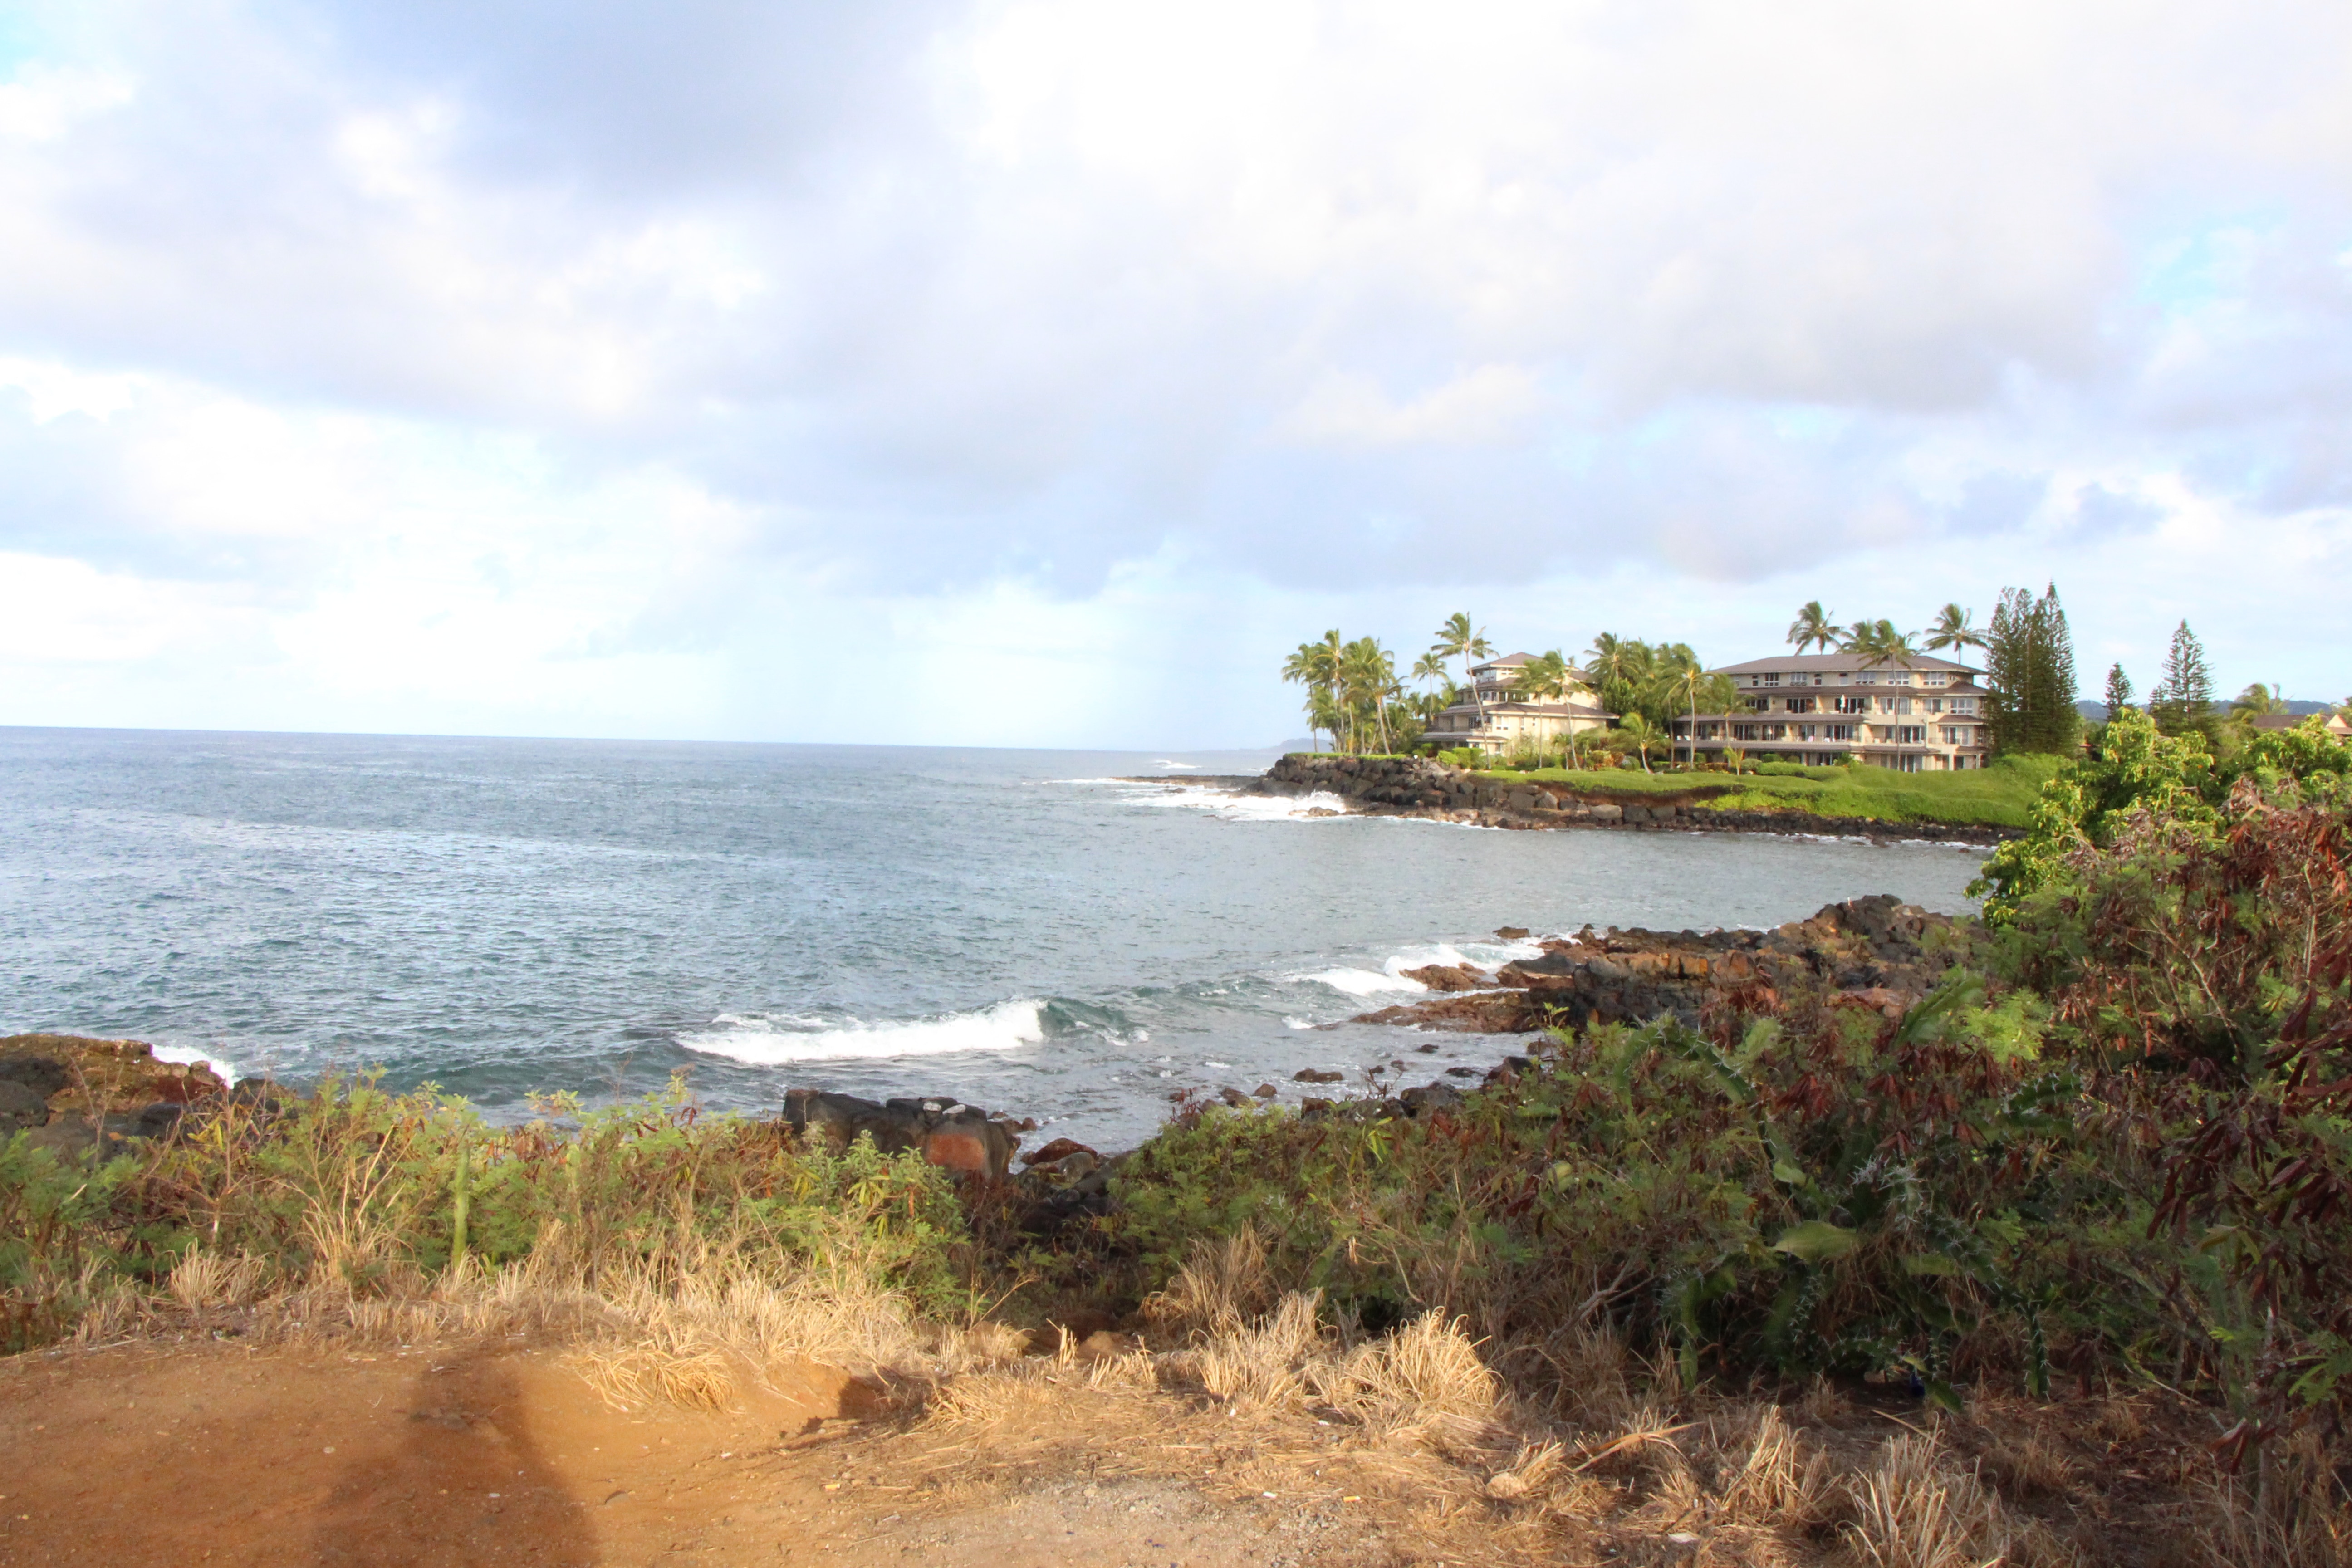 MLM Recruiting Series: Day 1 from Kauai – Product or Opportunity?